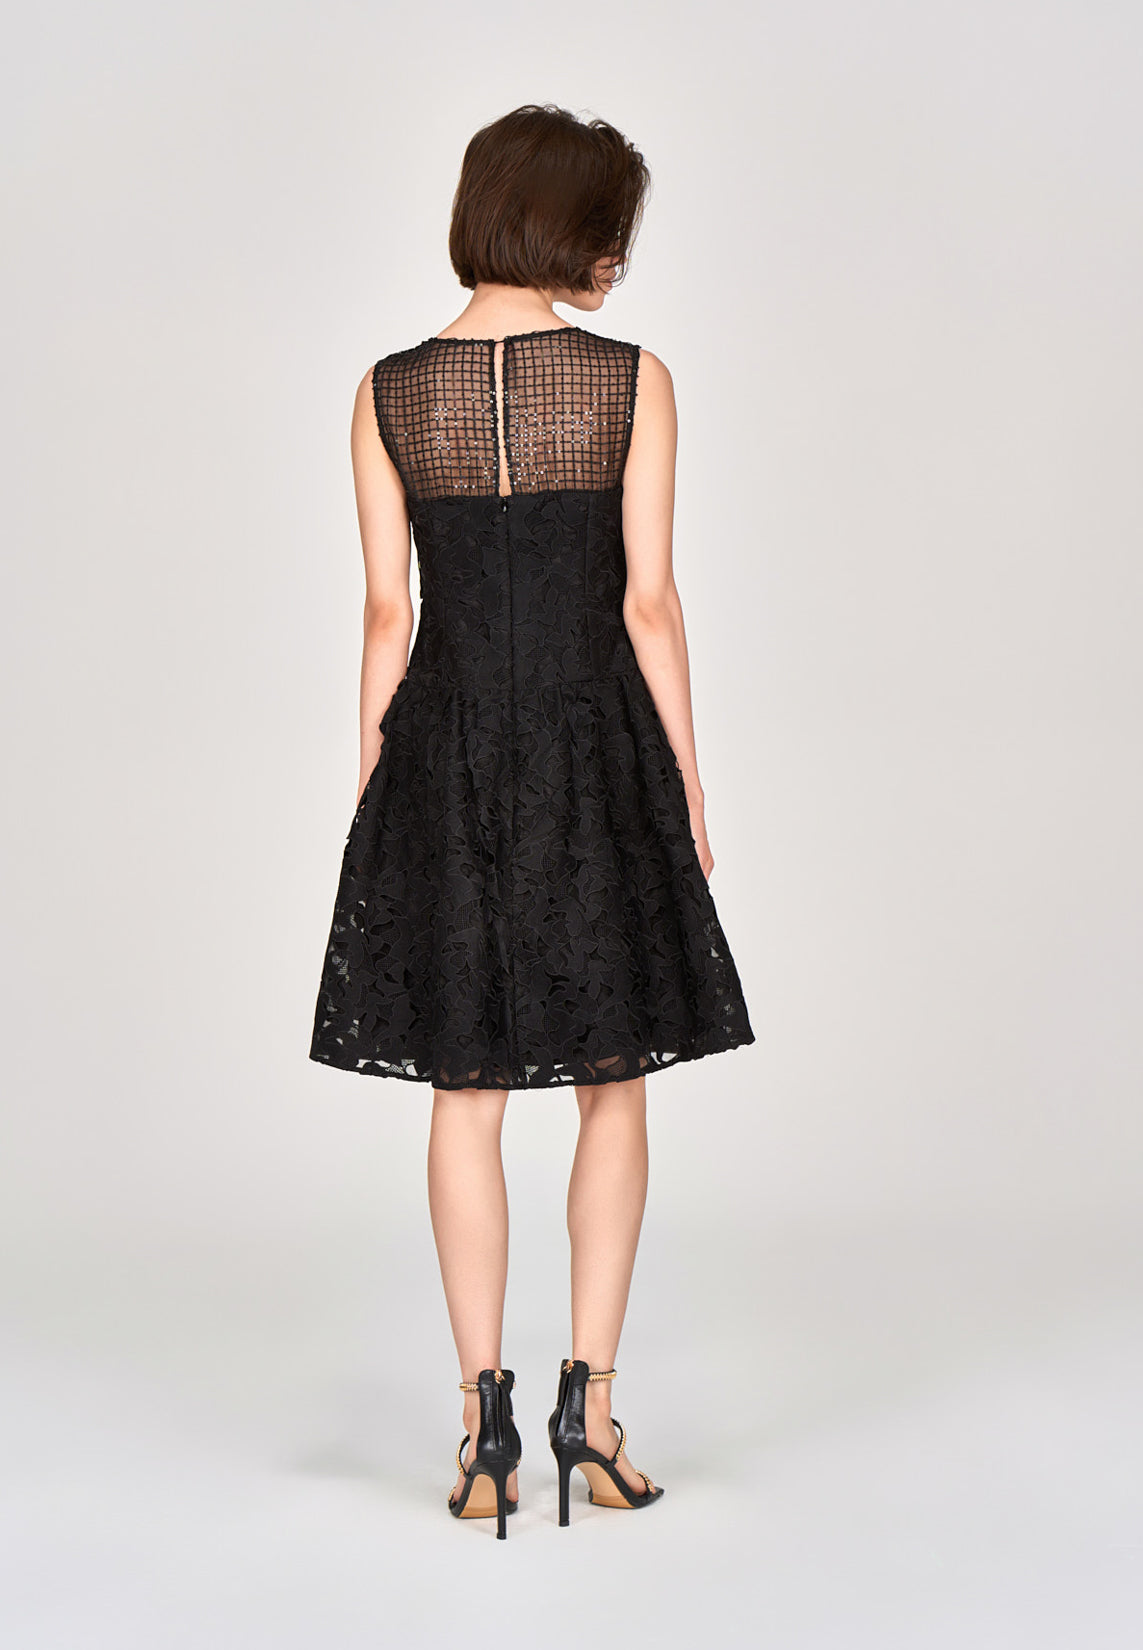 Black Lace Sleeveless Dress with Bow